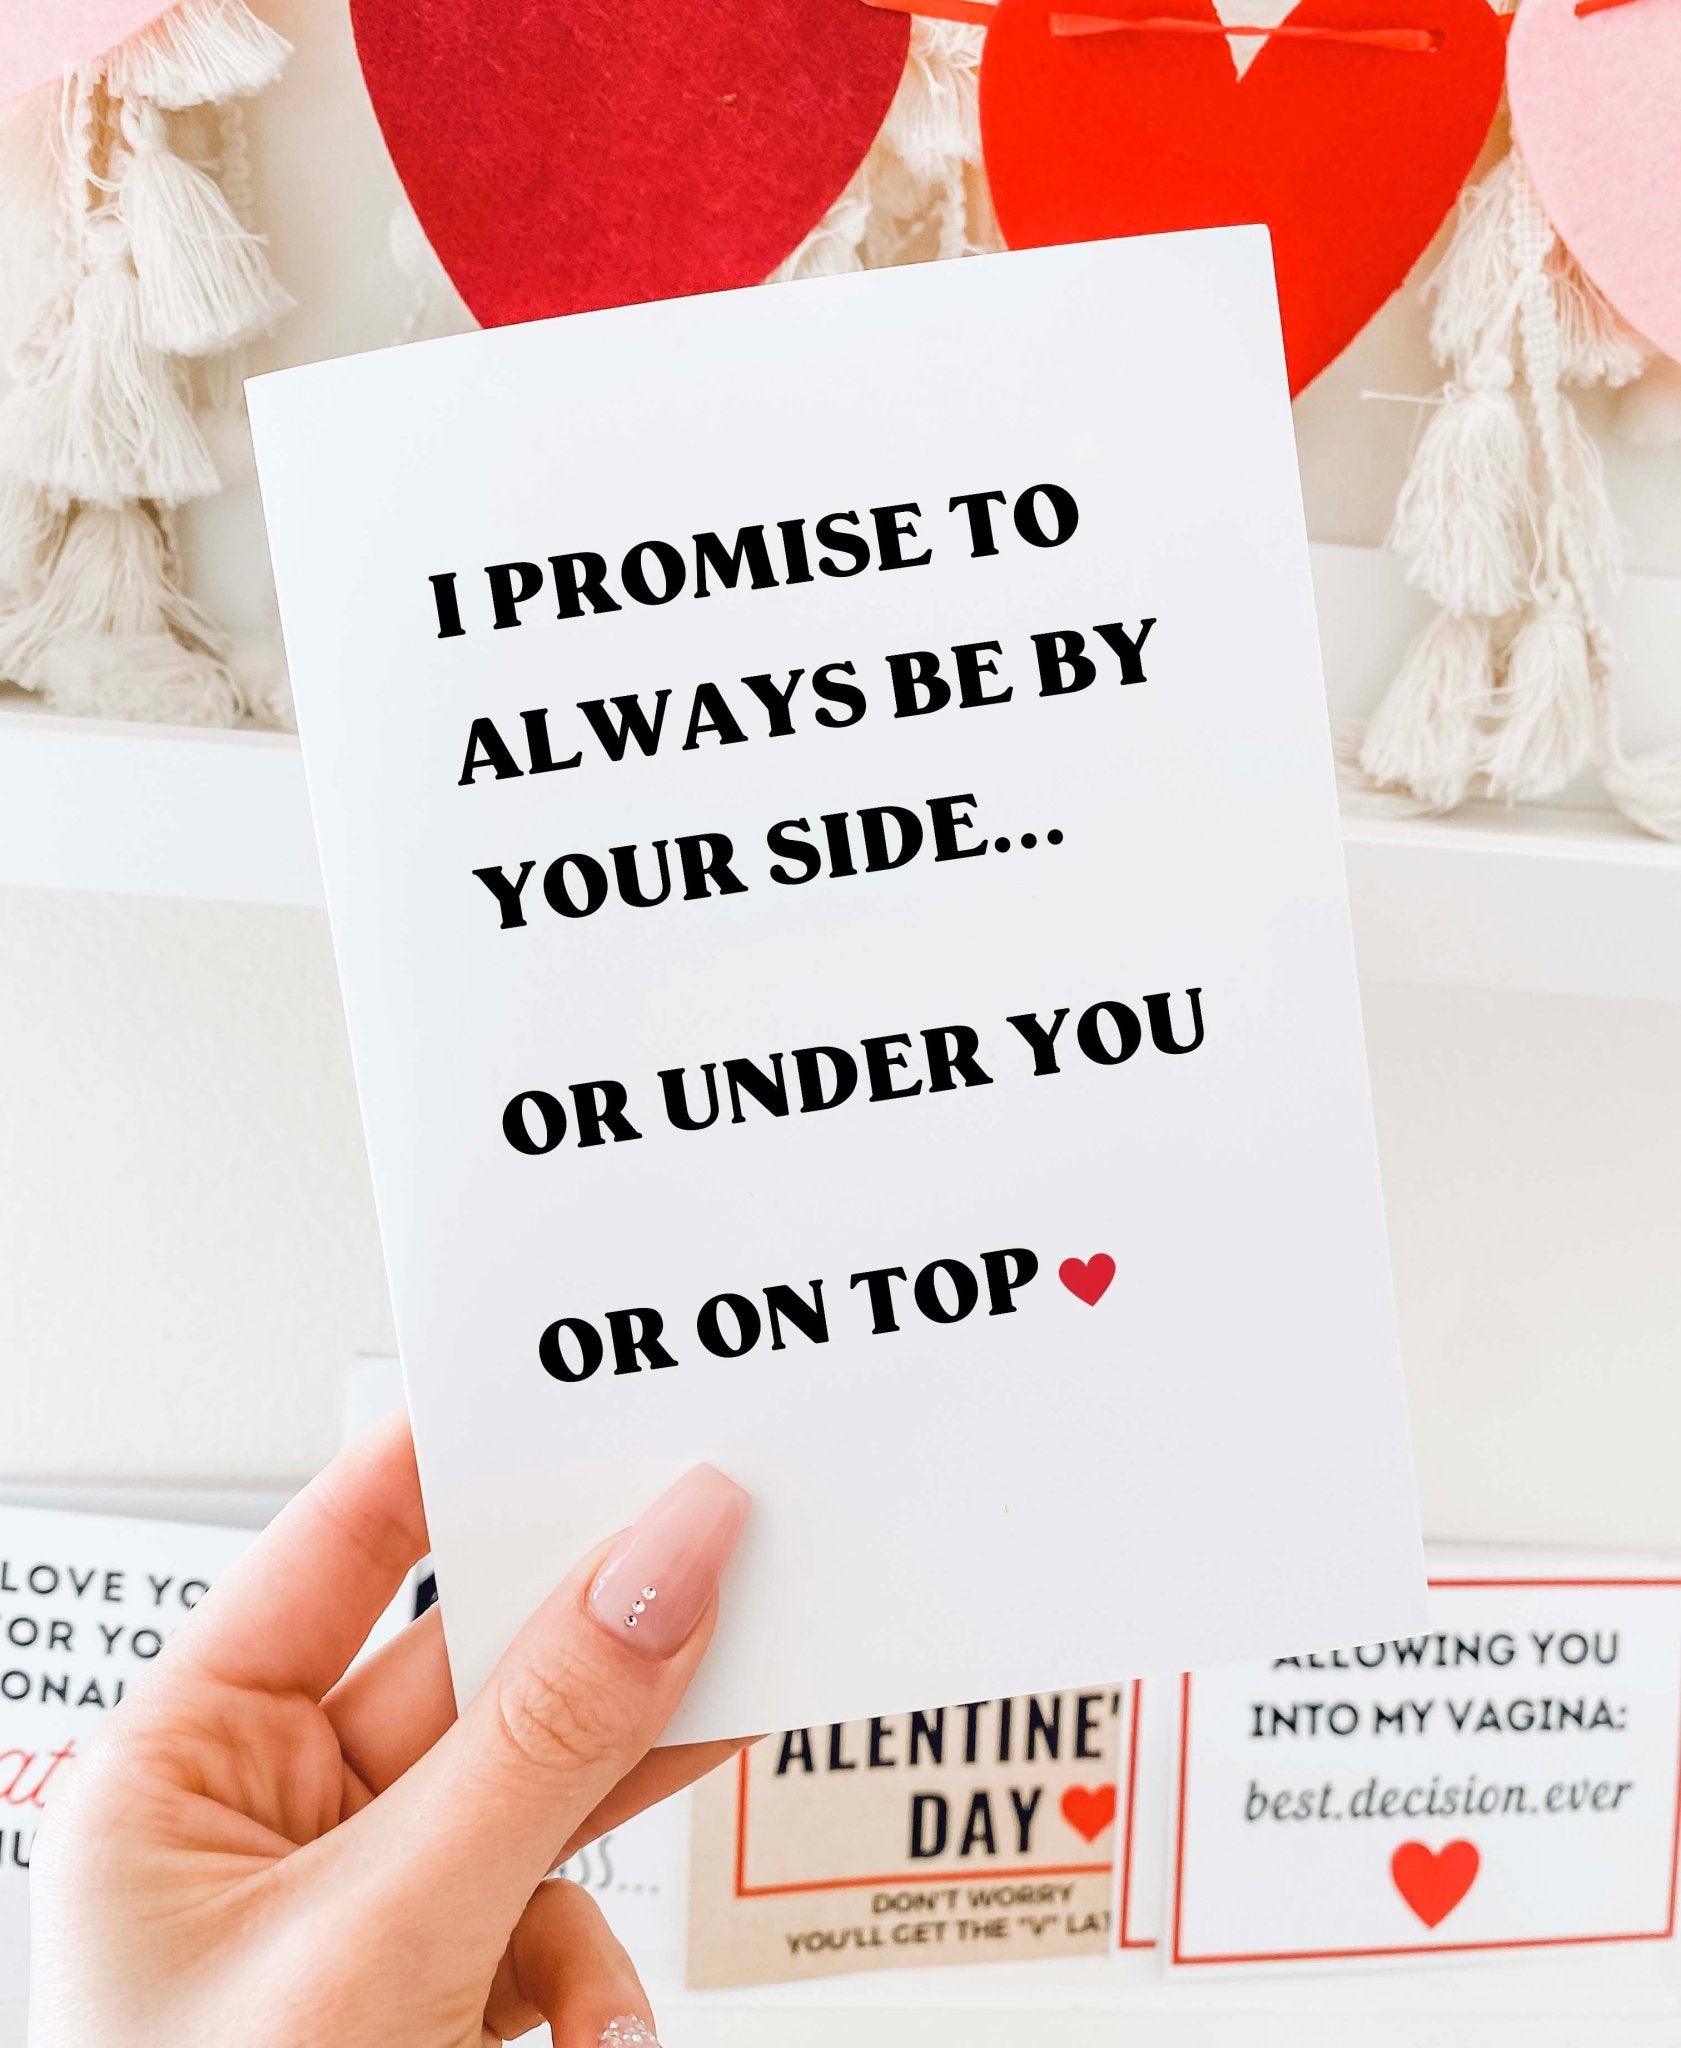 I Promise To Always Be By Your Side Or Under You Or On Top Of You Greeting Card - UntamedEgo LLC.